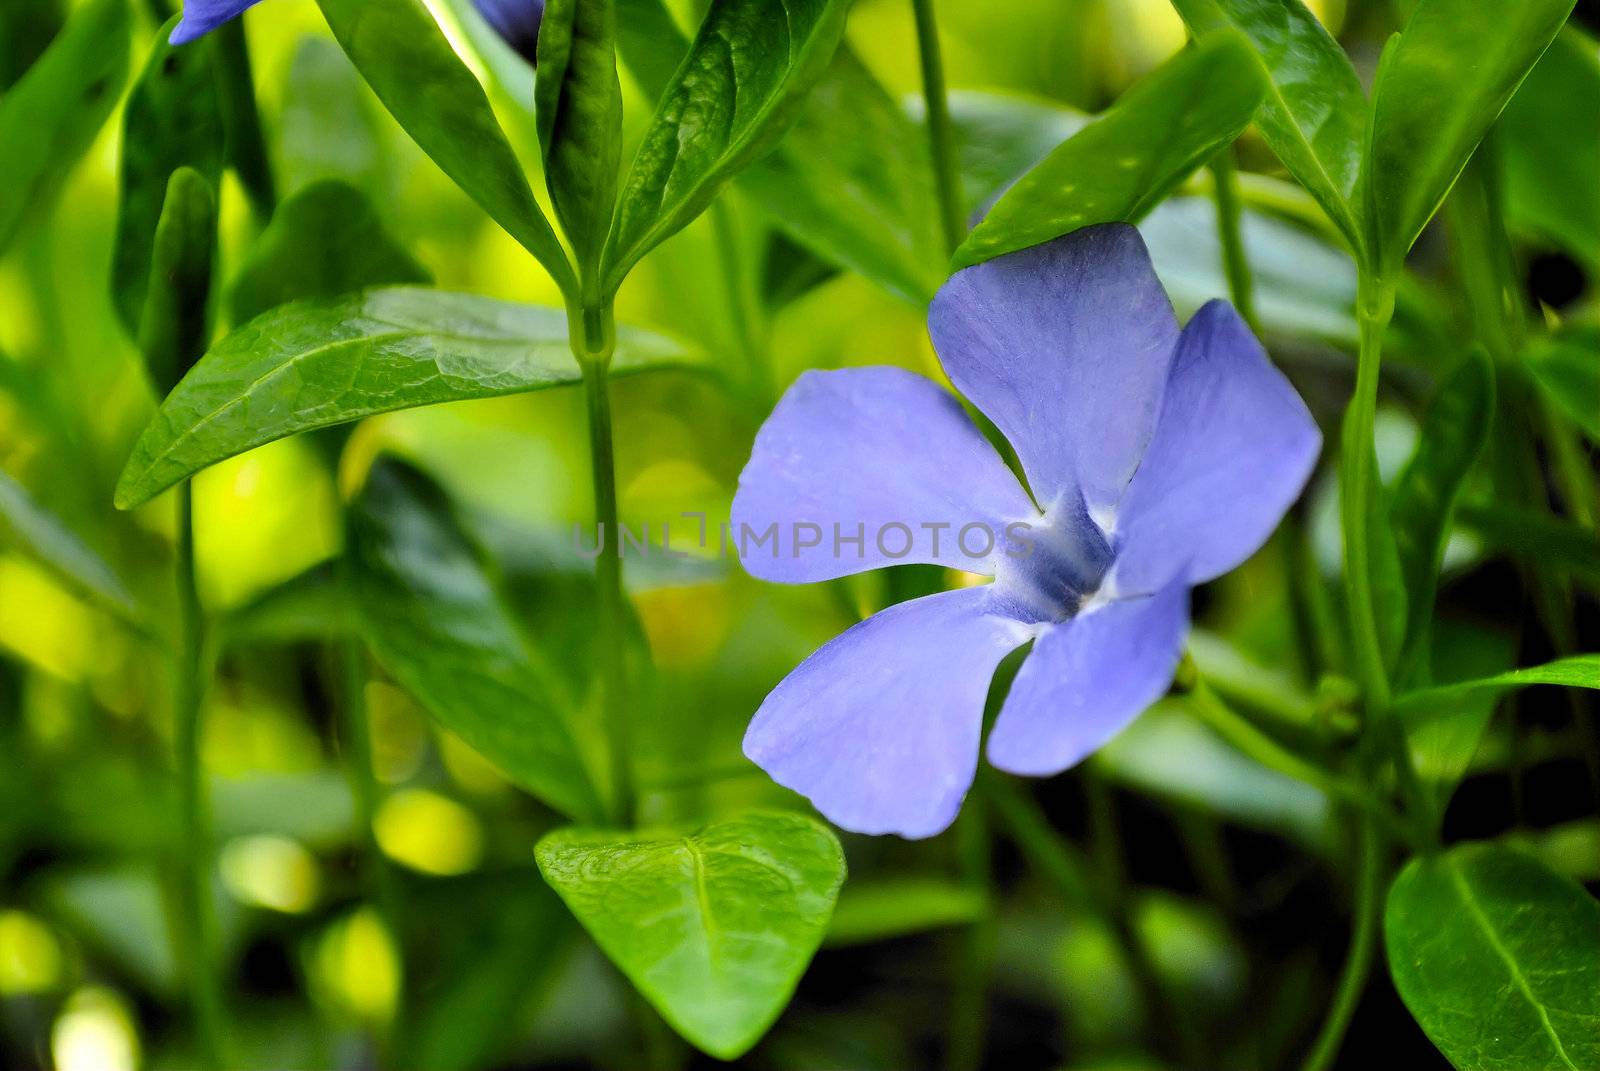 Periwinkle growing in the spring forest of green grass